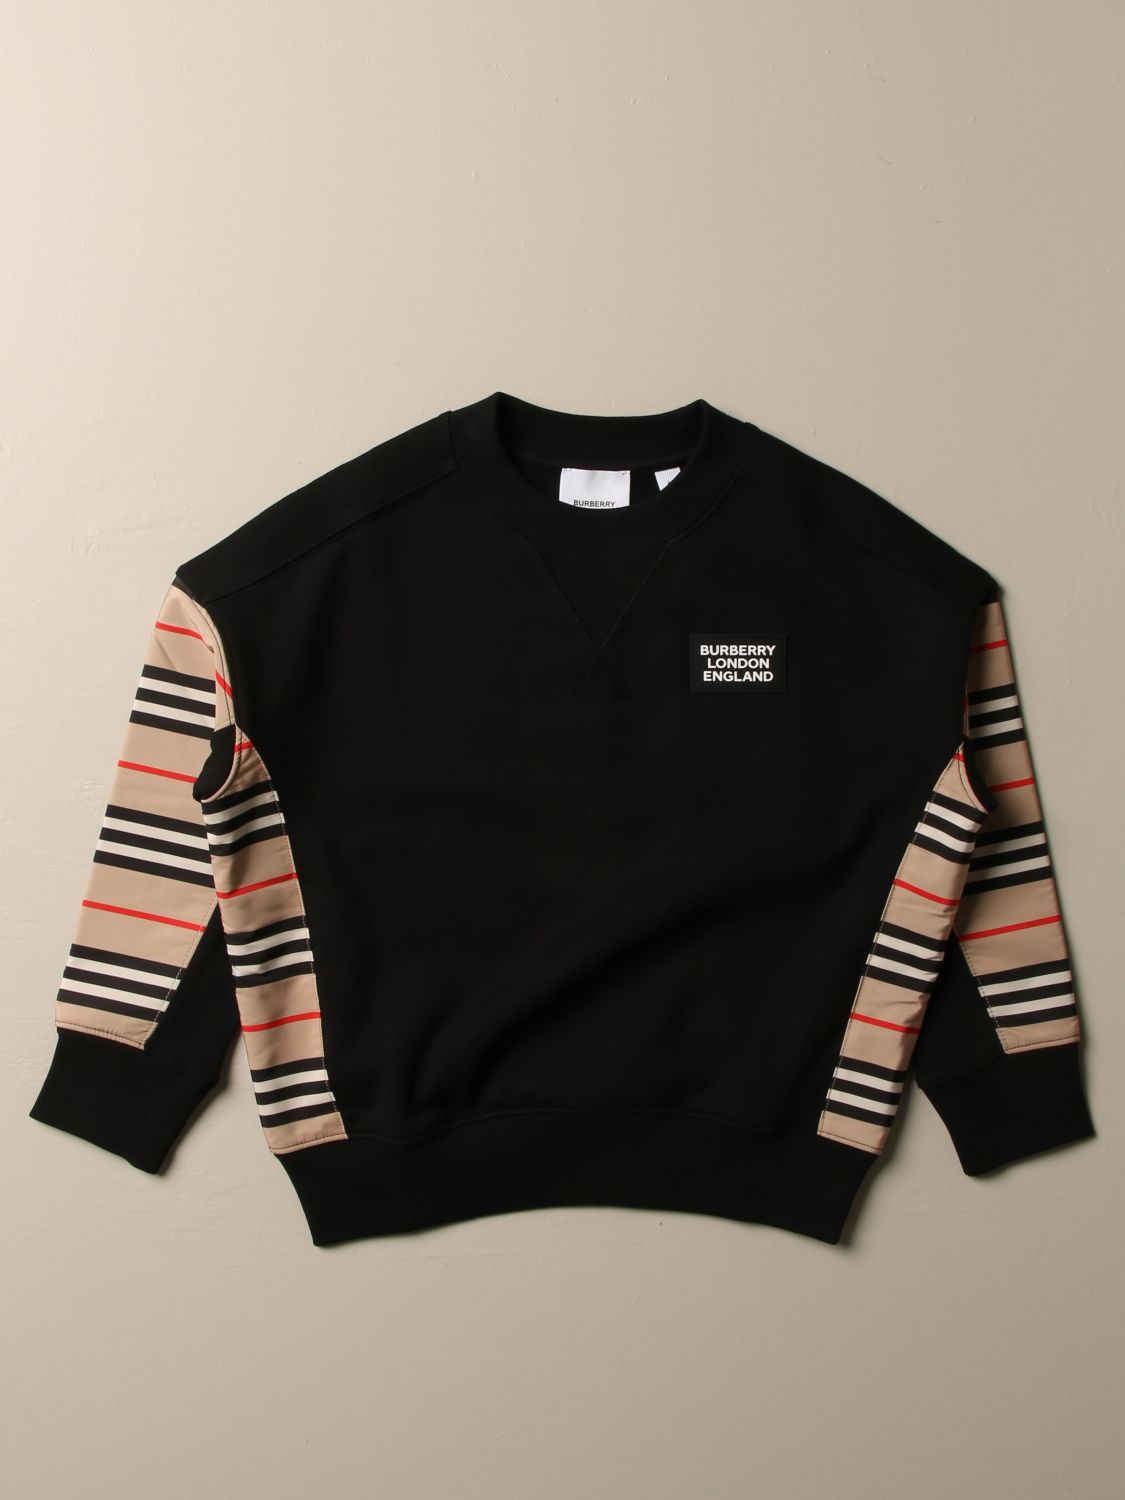 Burberry cotton sweatshirt with striped 